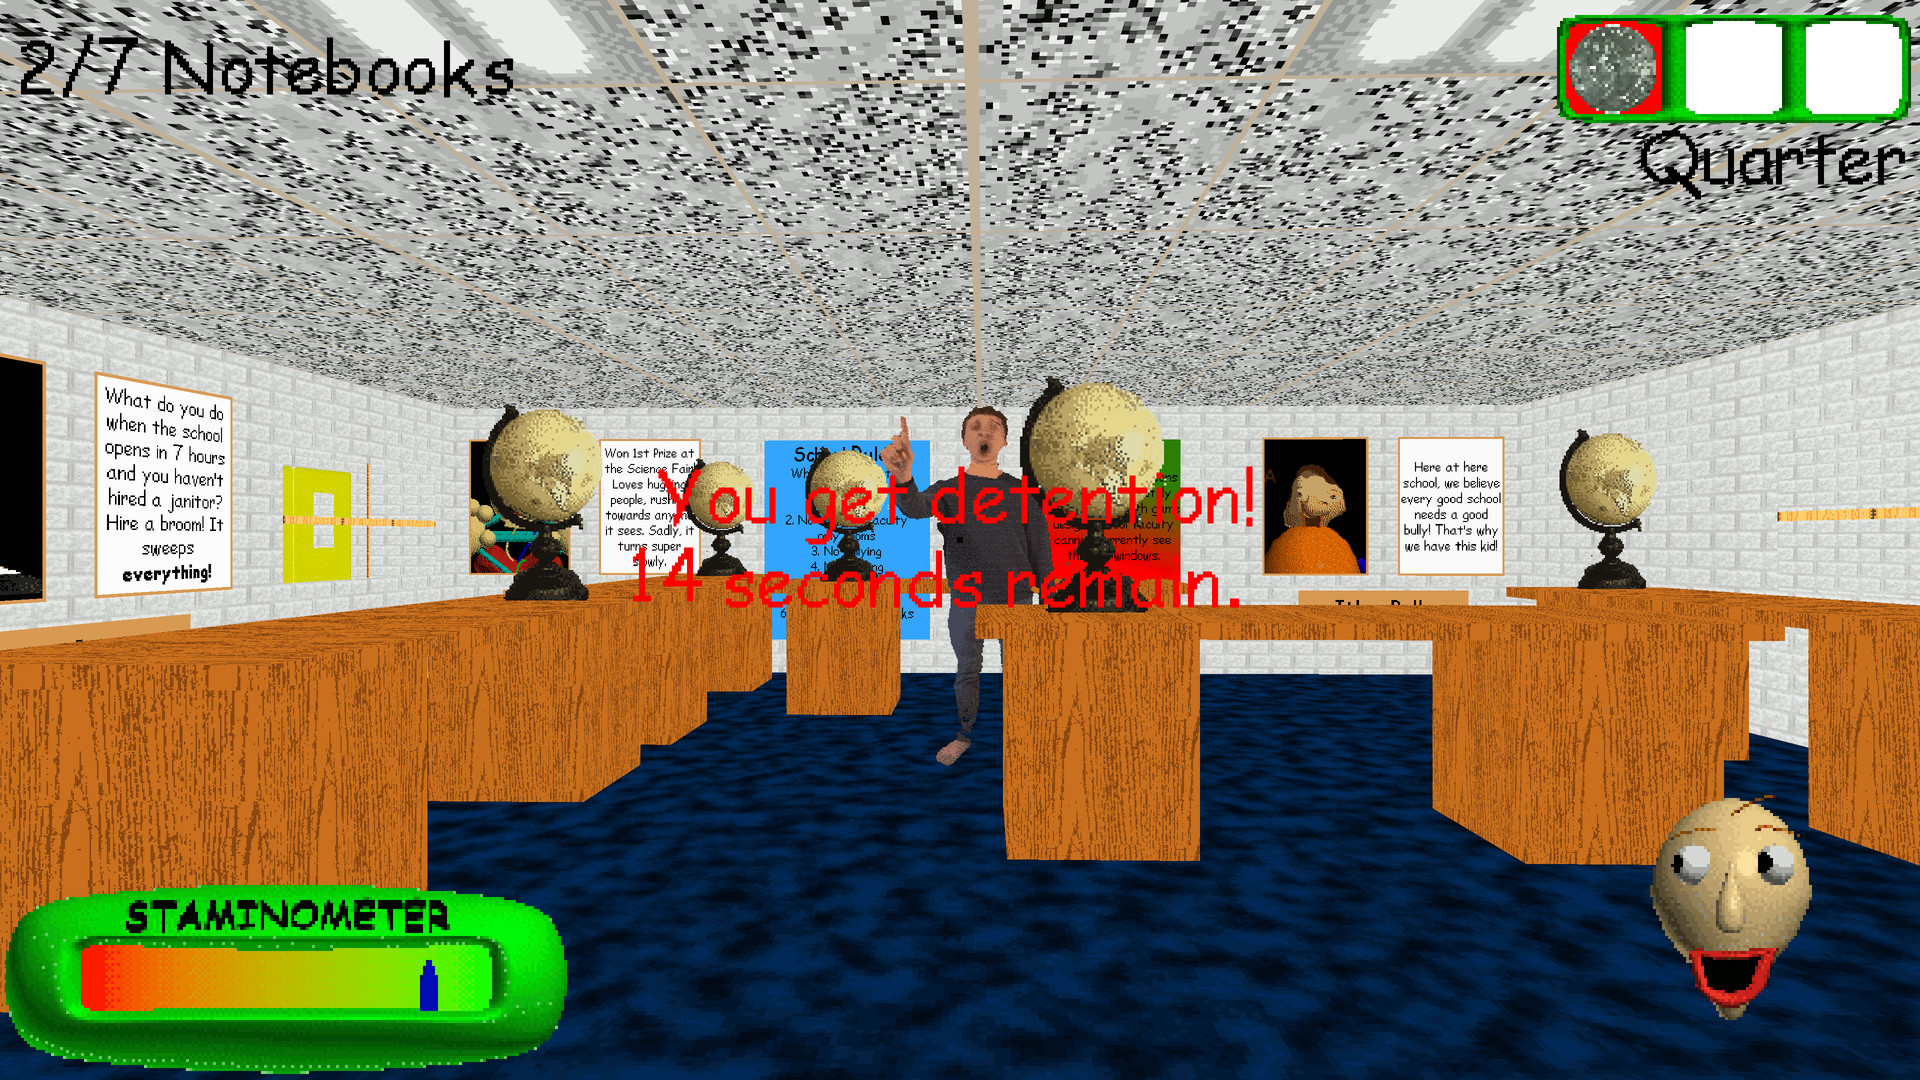 ✨(OPEN) Early Access! Baldi's Basics Classic RP Remastered!✨ 